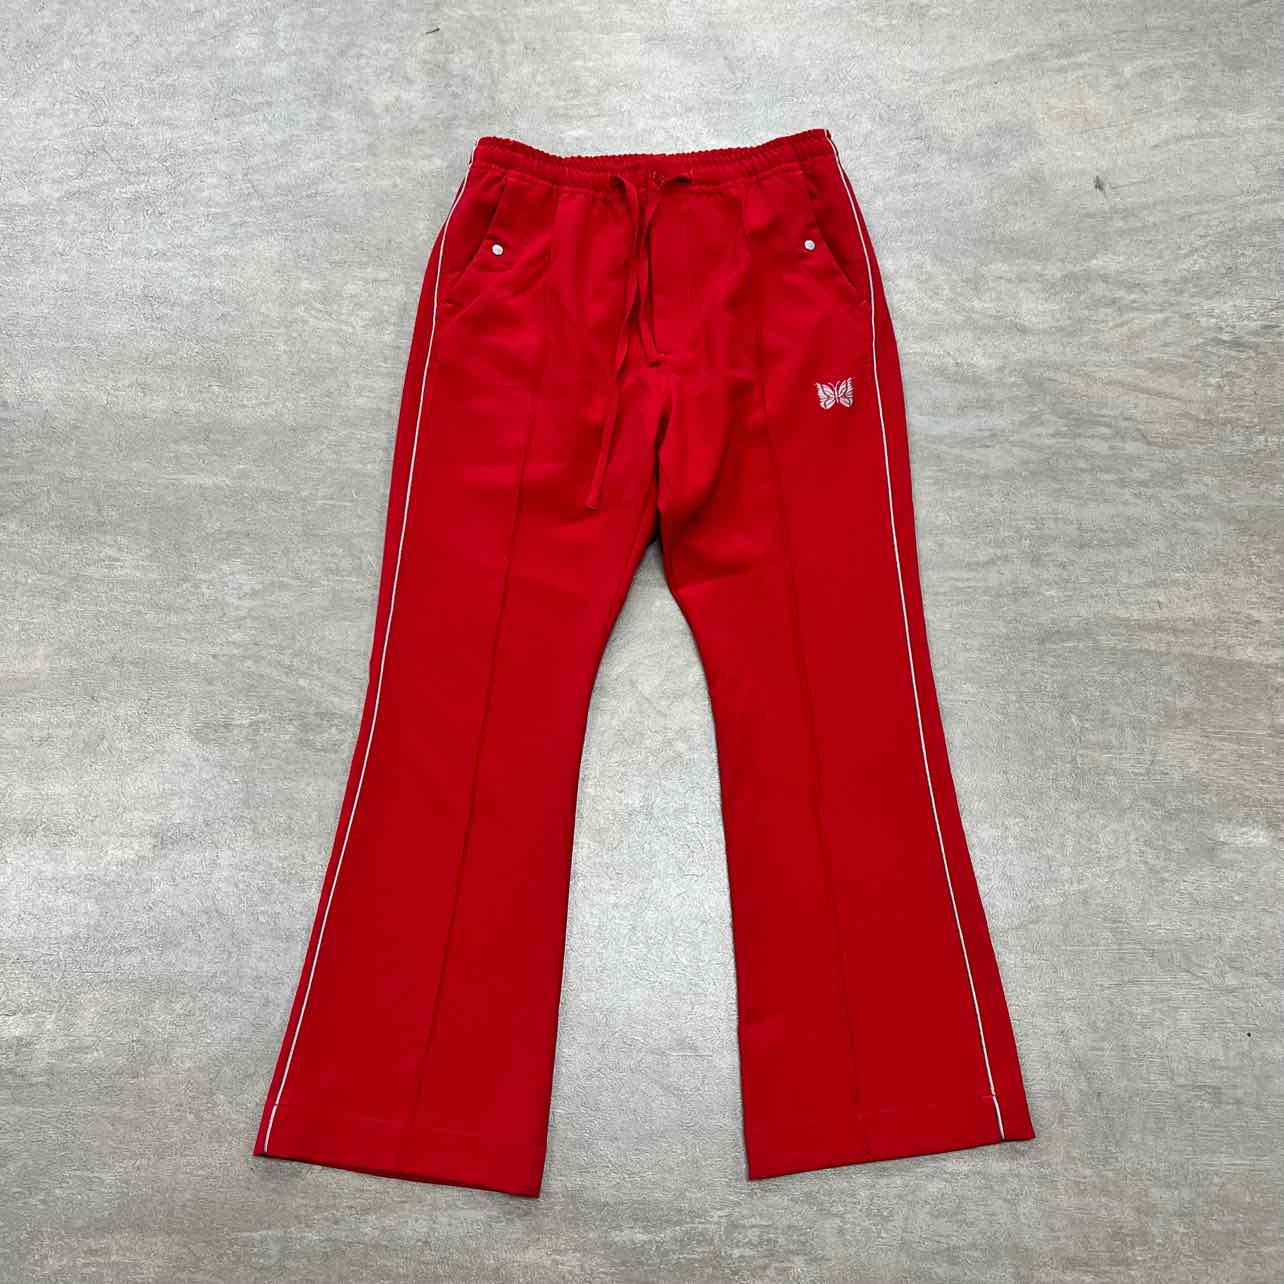 Needles Pant &quot;COWBOY&quot; Red Used Size M